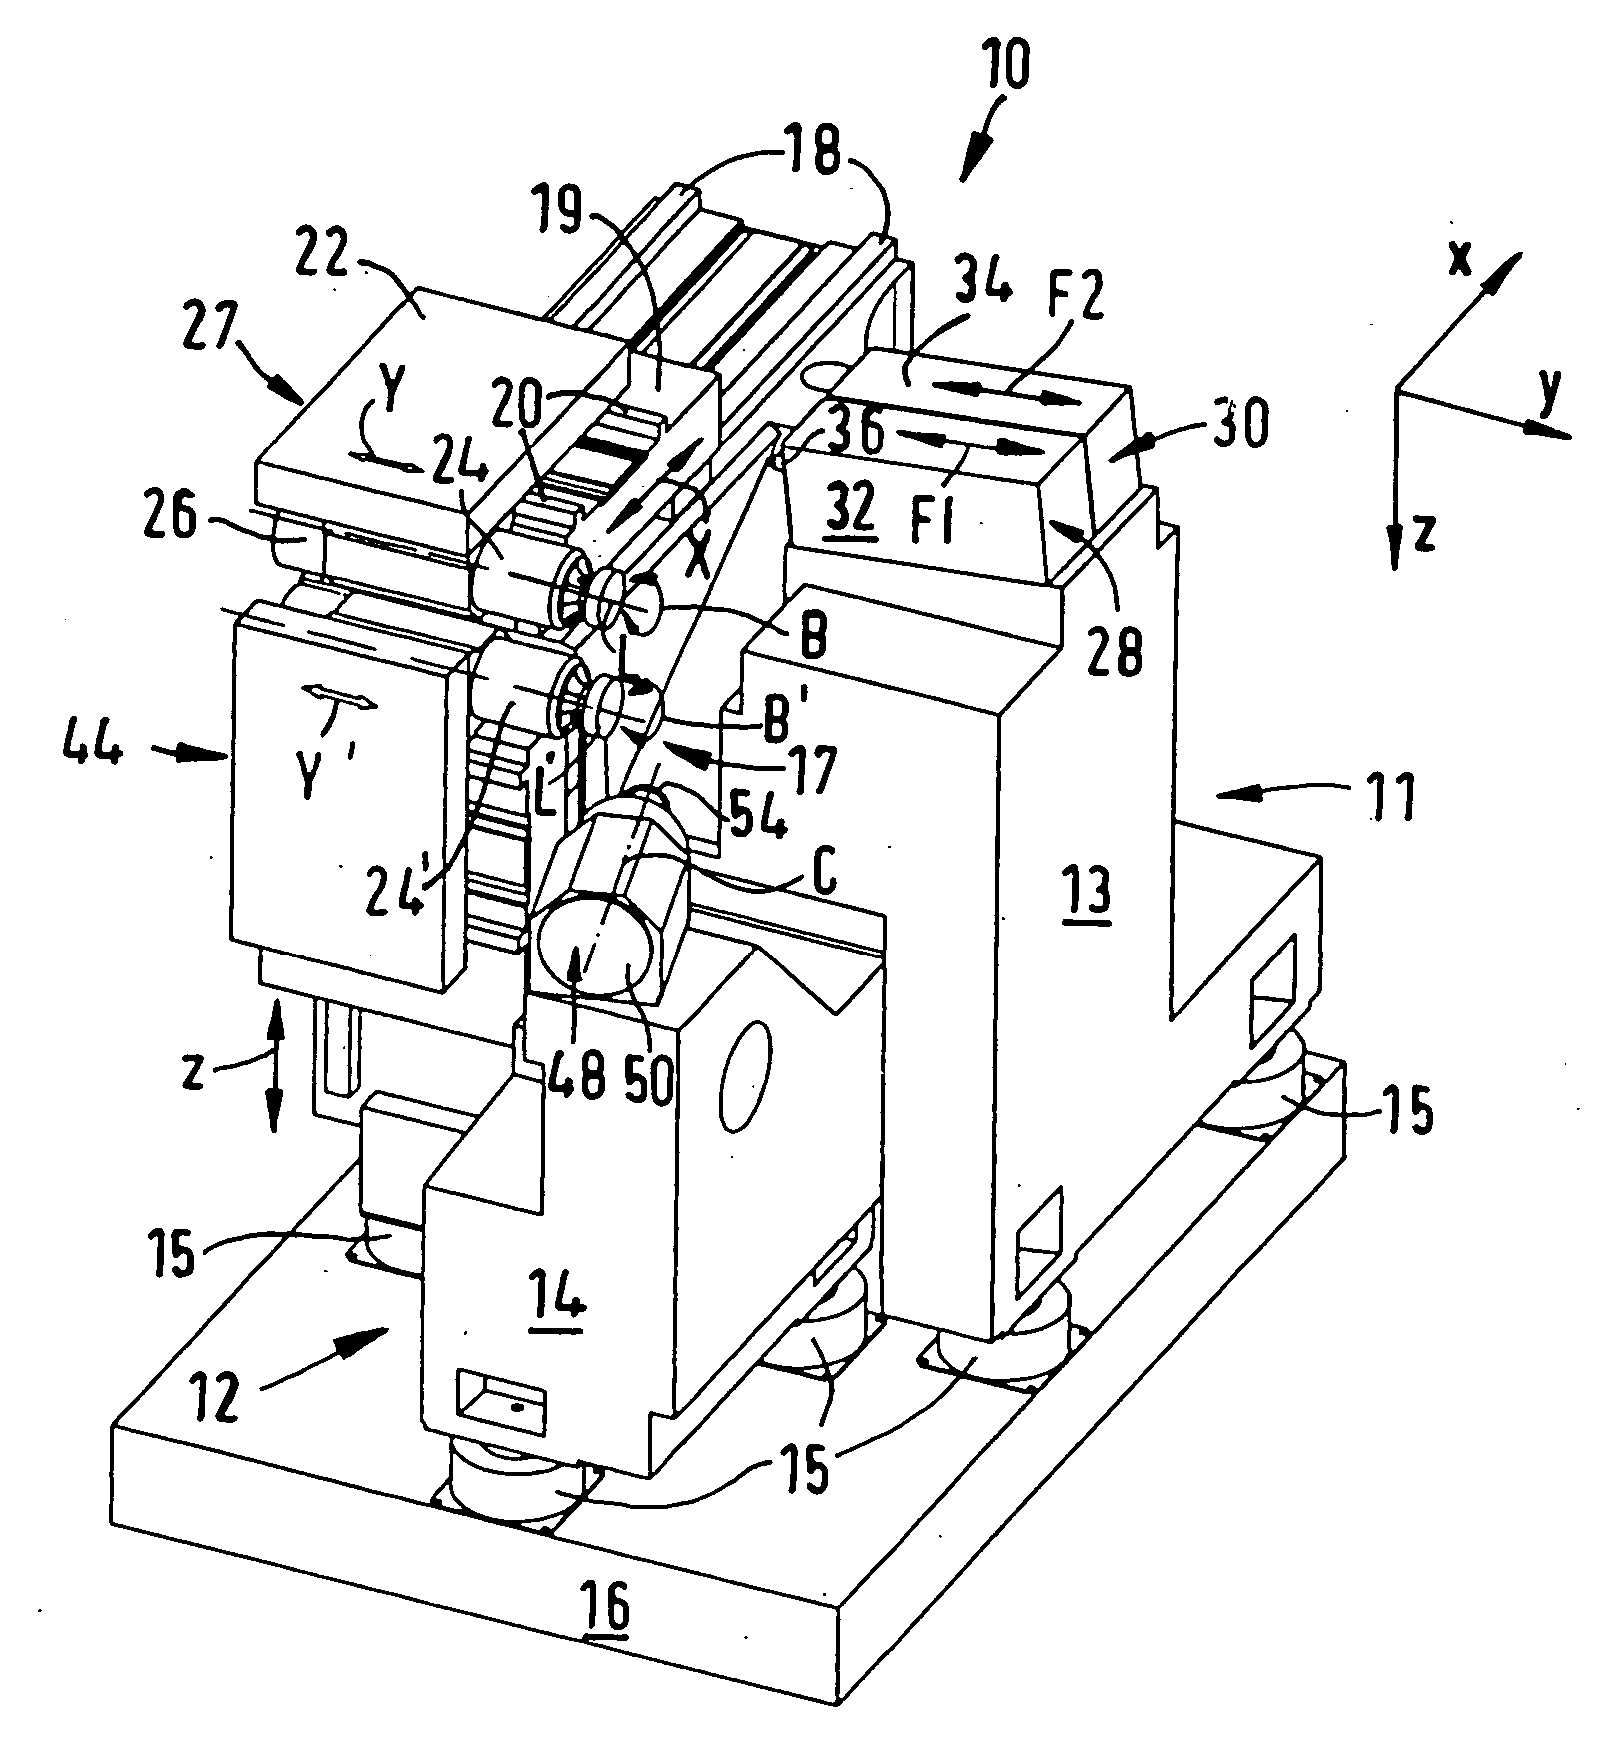 High-performance cutting and turning machine and method for machining particularly spectacle lenses